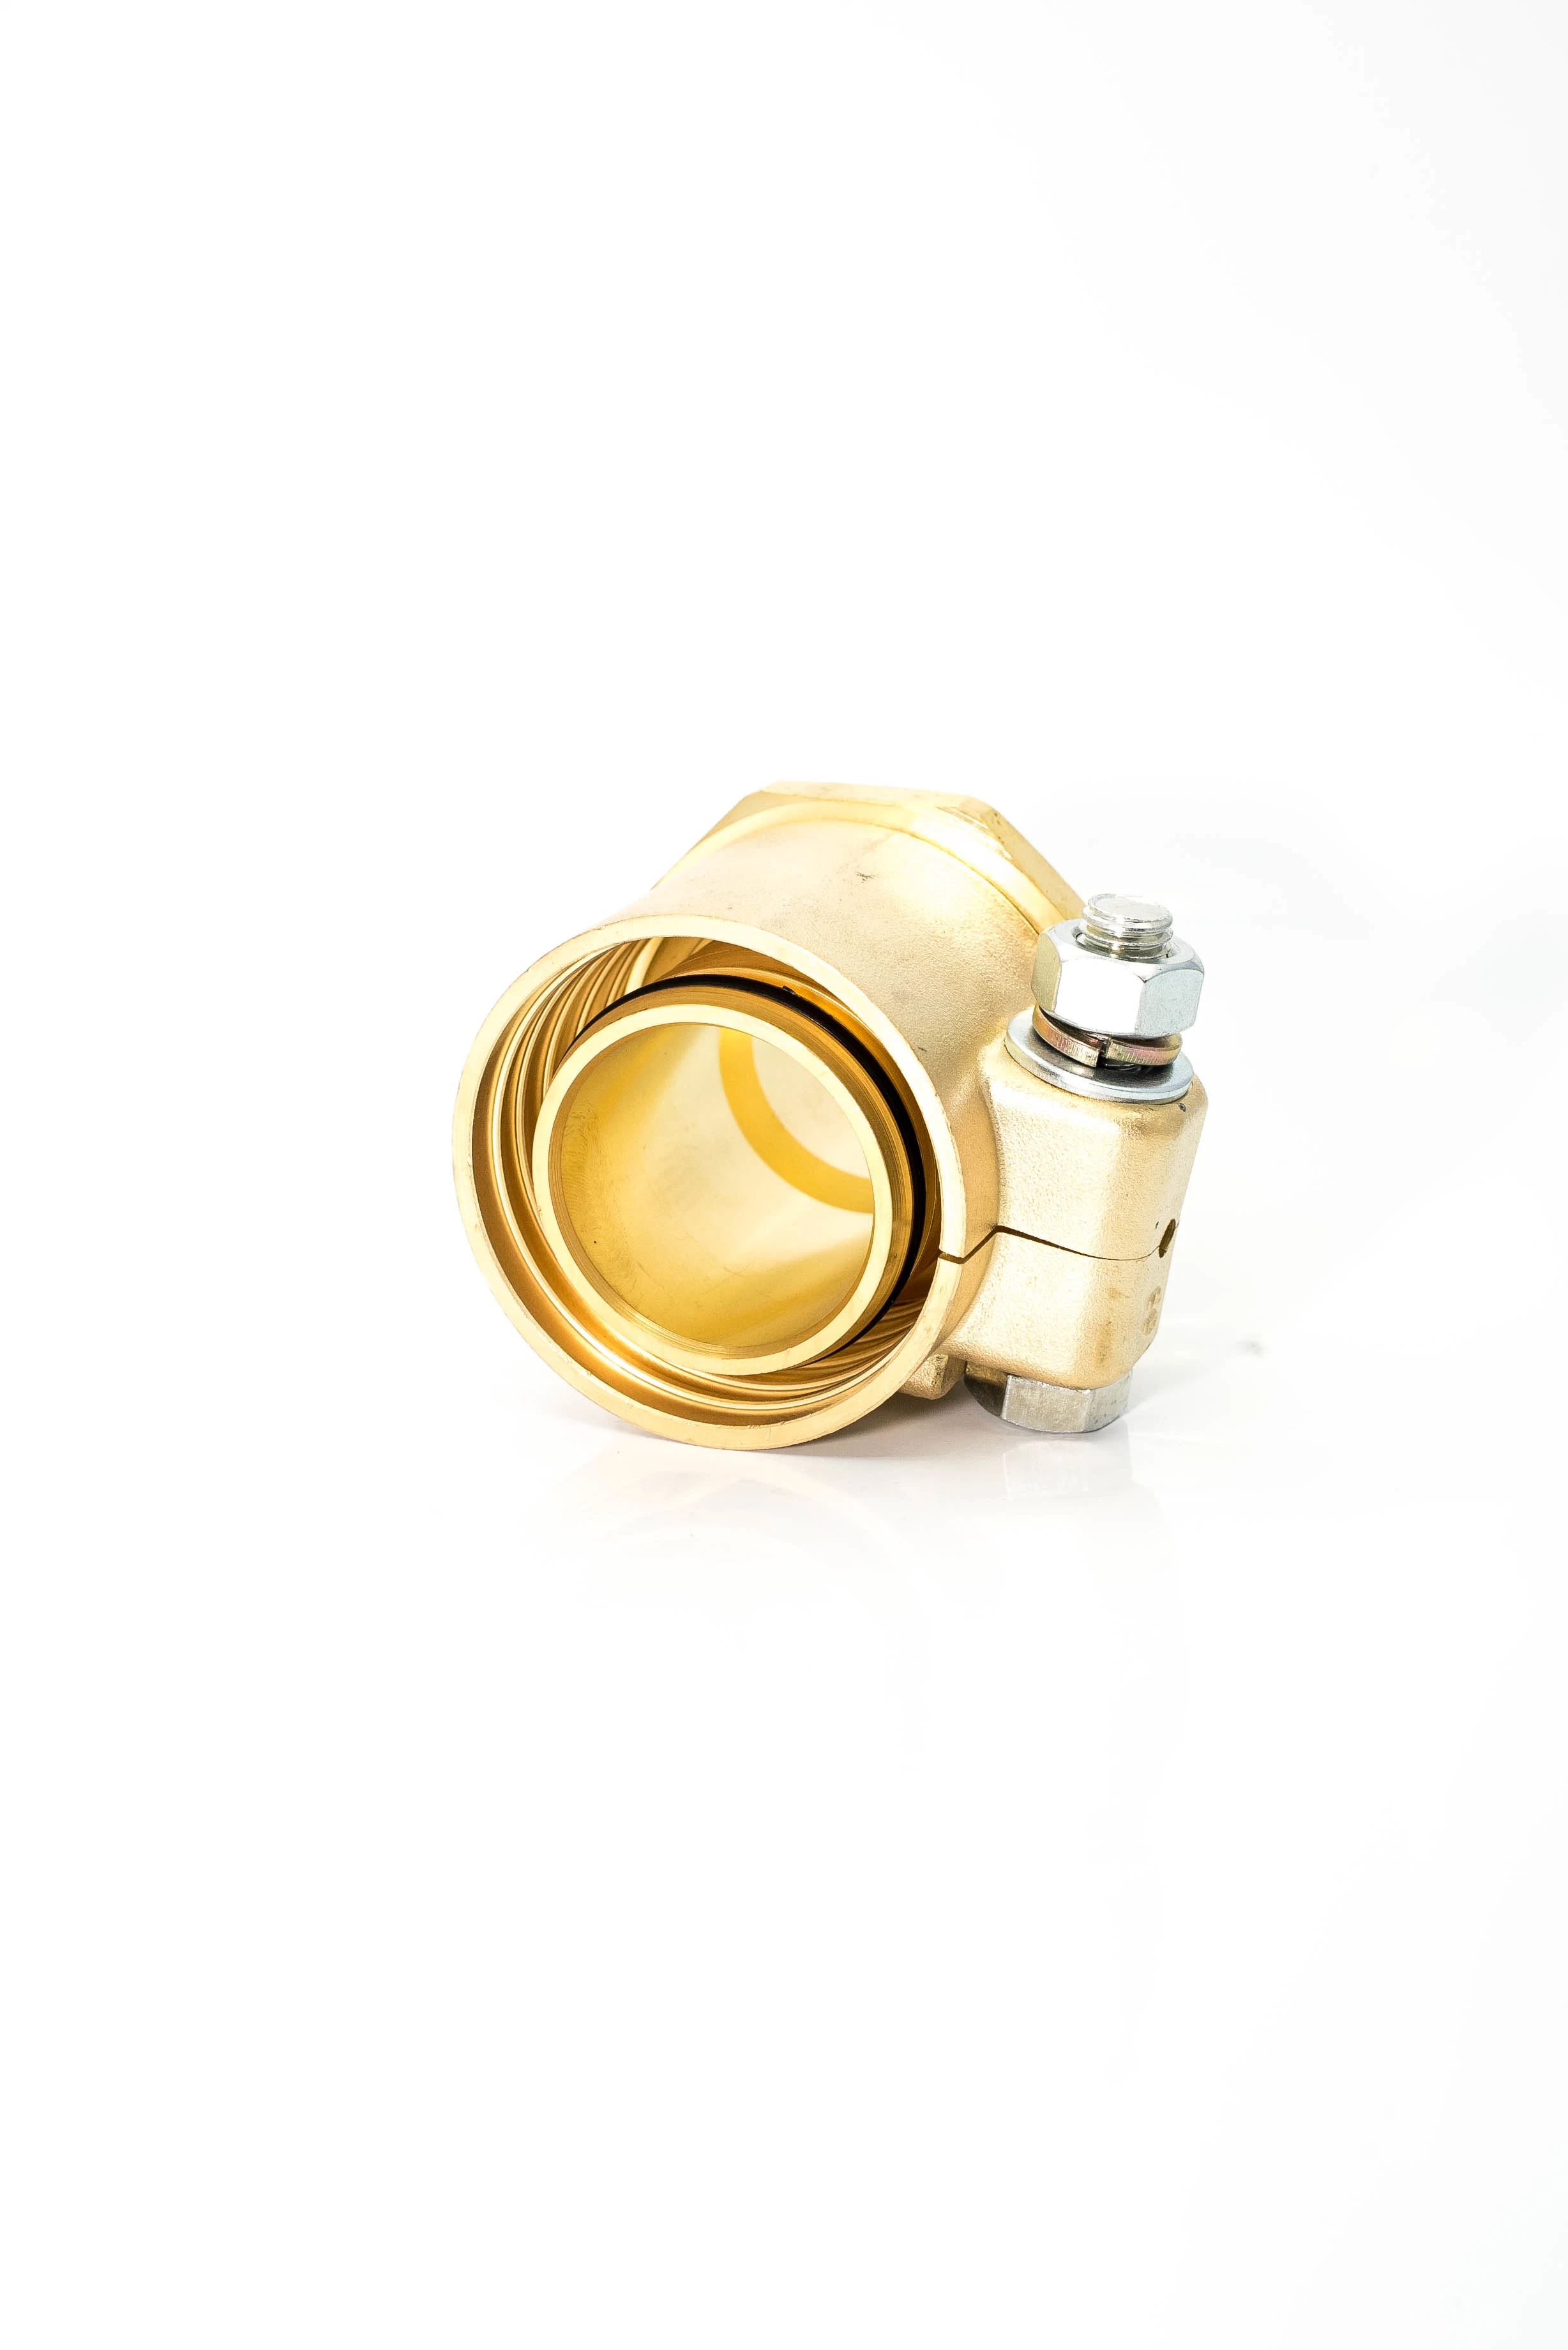 Faliwell High-Quality Joint with Welding External Thread Connects Emergency Shut-off Valve Copper Joint for Oil Petroleum Pipeline Style 2